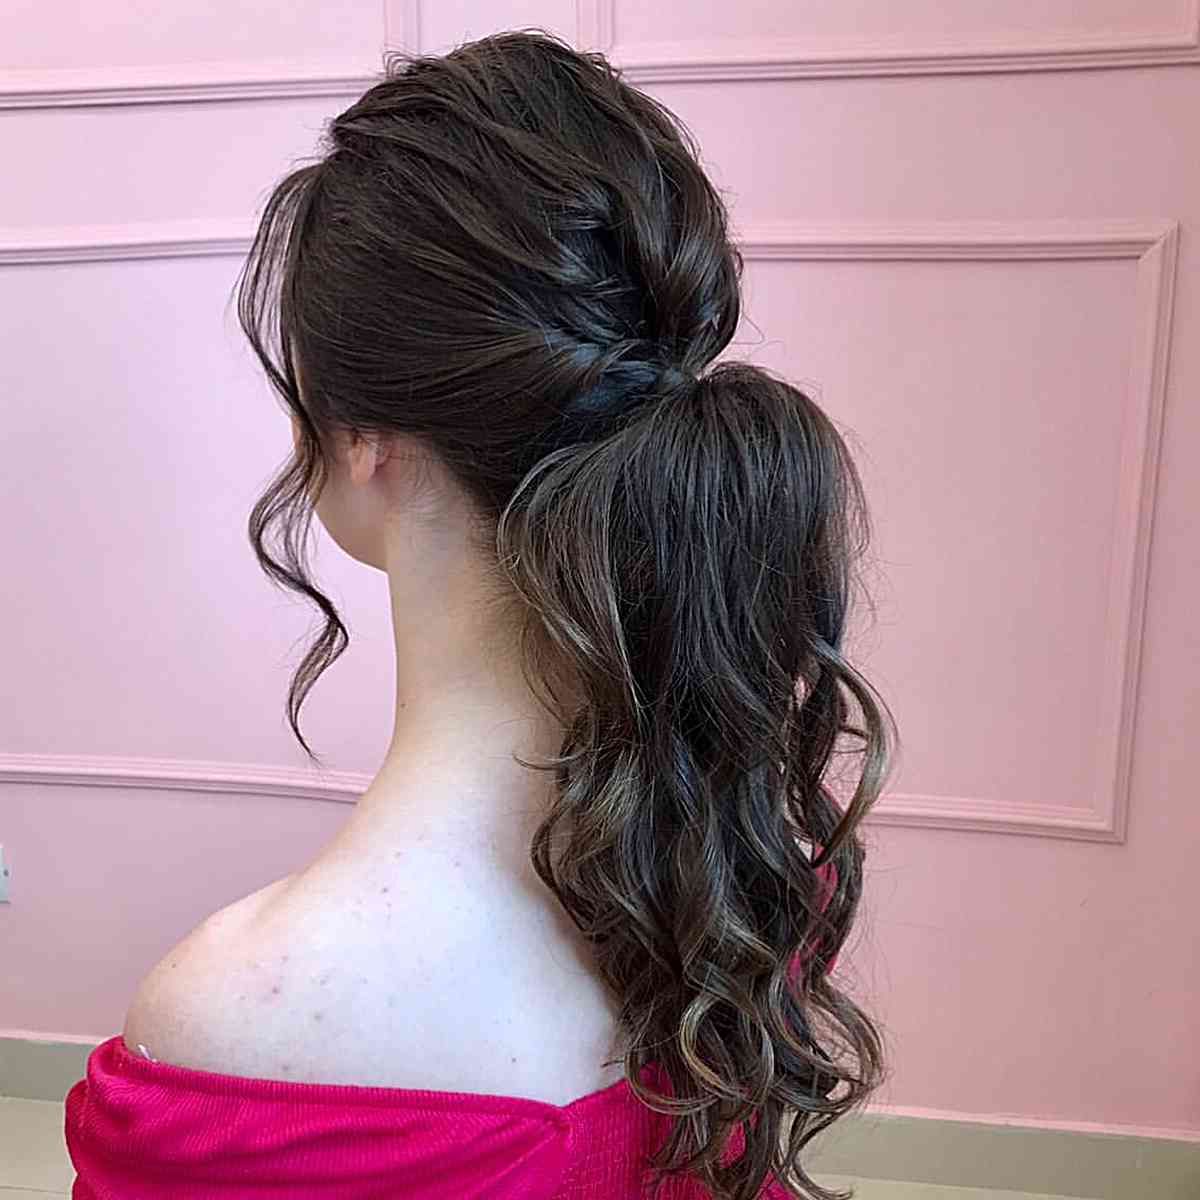 33 Cutest Prom Ponytail Hairstyles That Are Easy To Do! Throughout Preferred Chic Ponytail Updo For Long Curly Hair (Gallery 8 of 15)